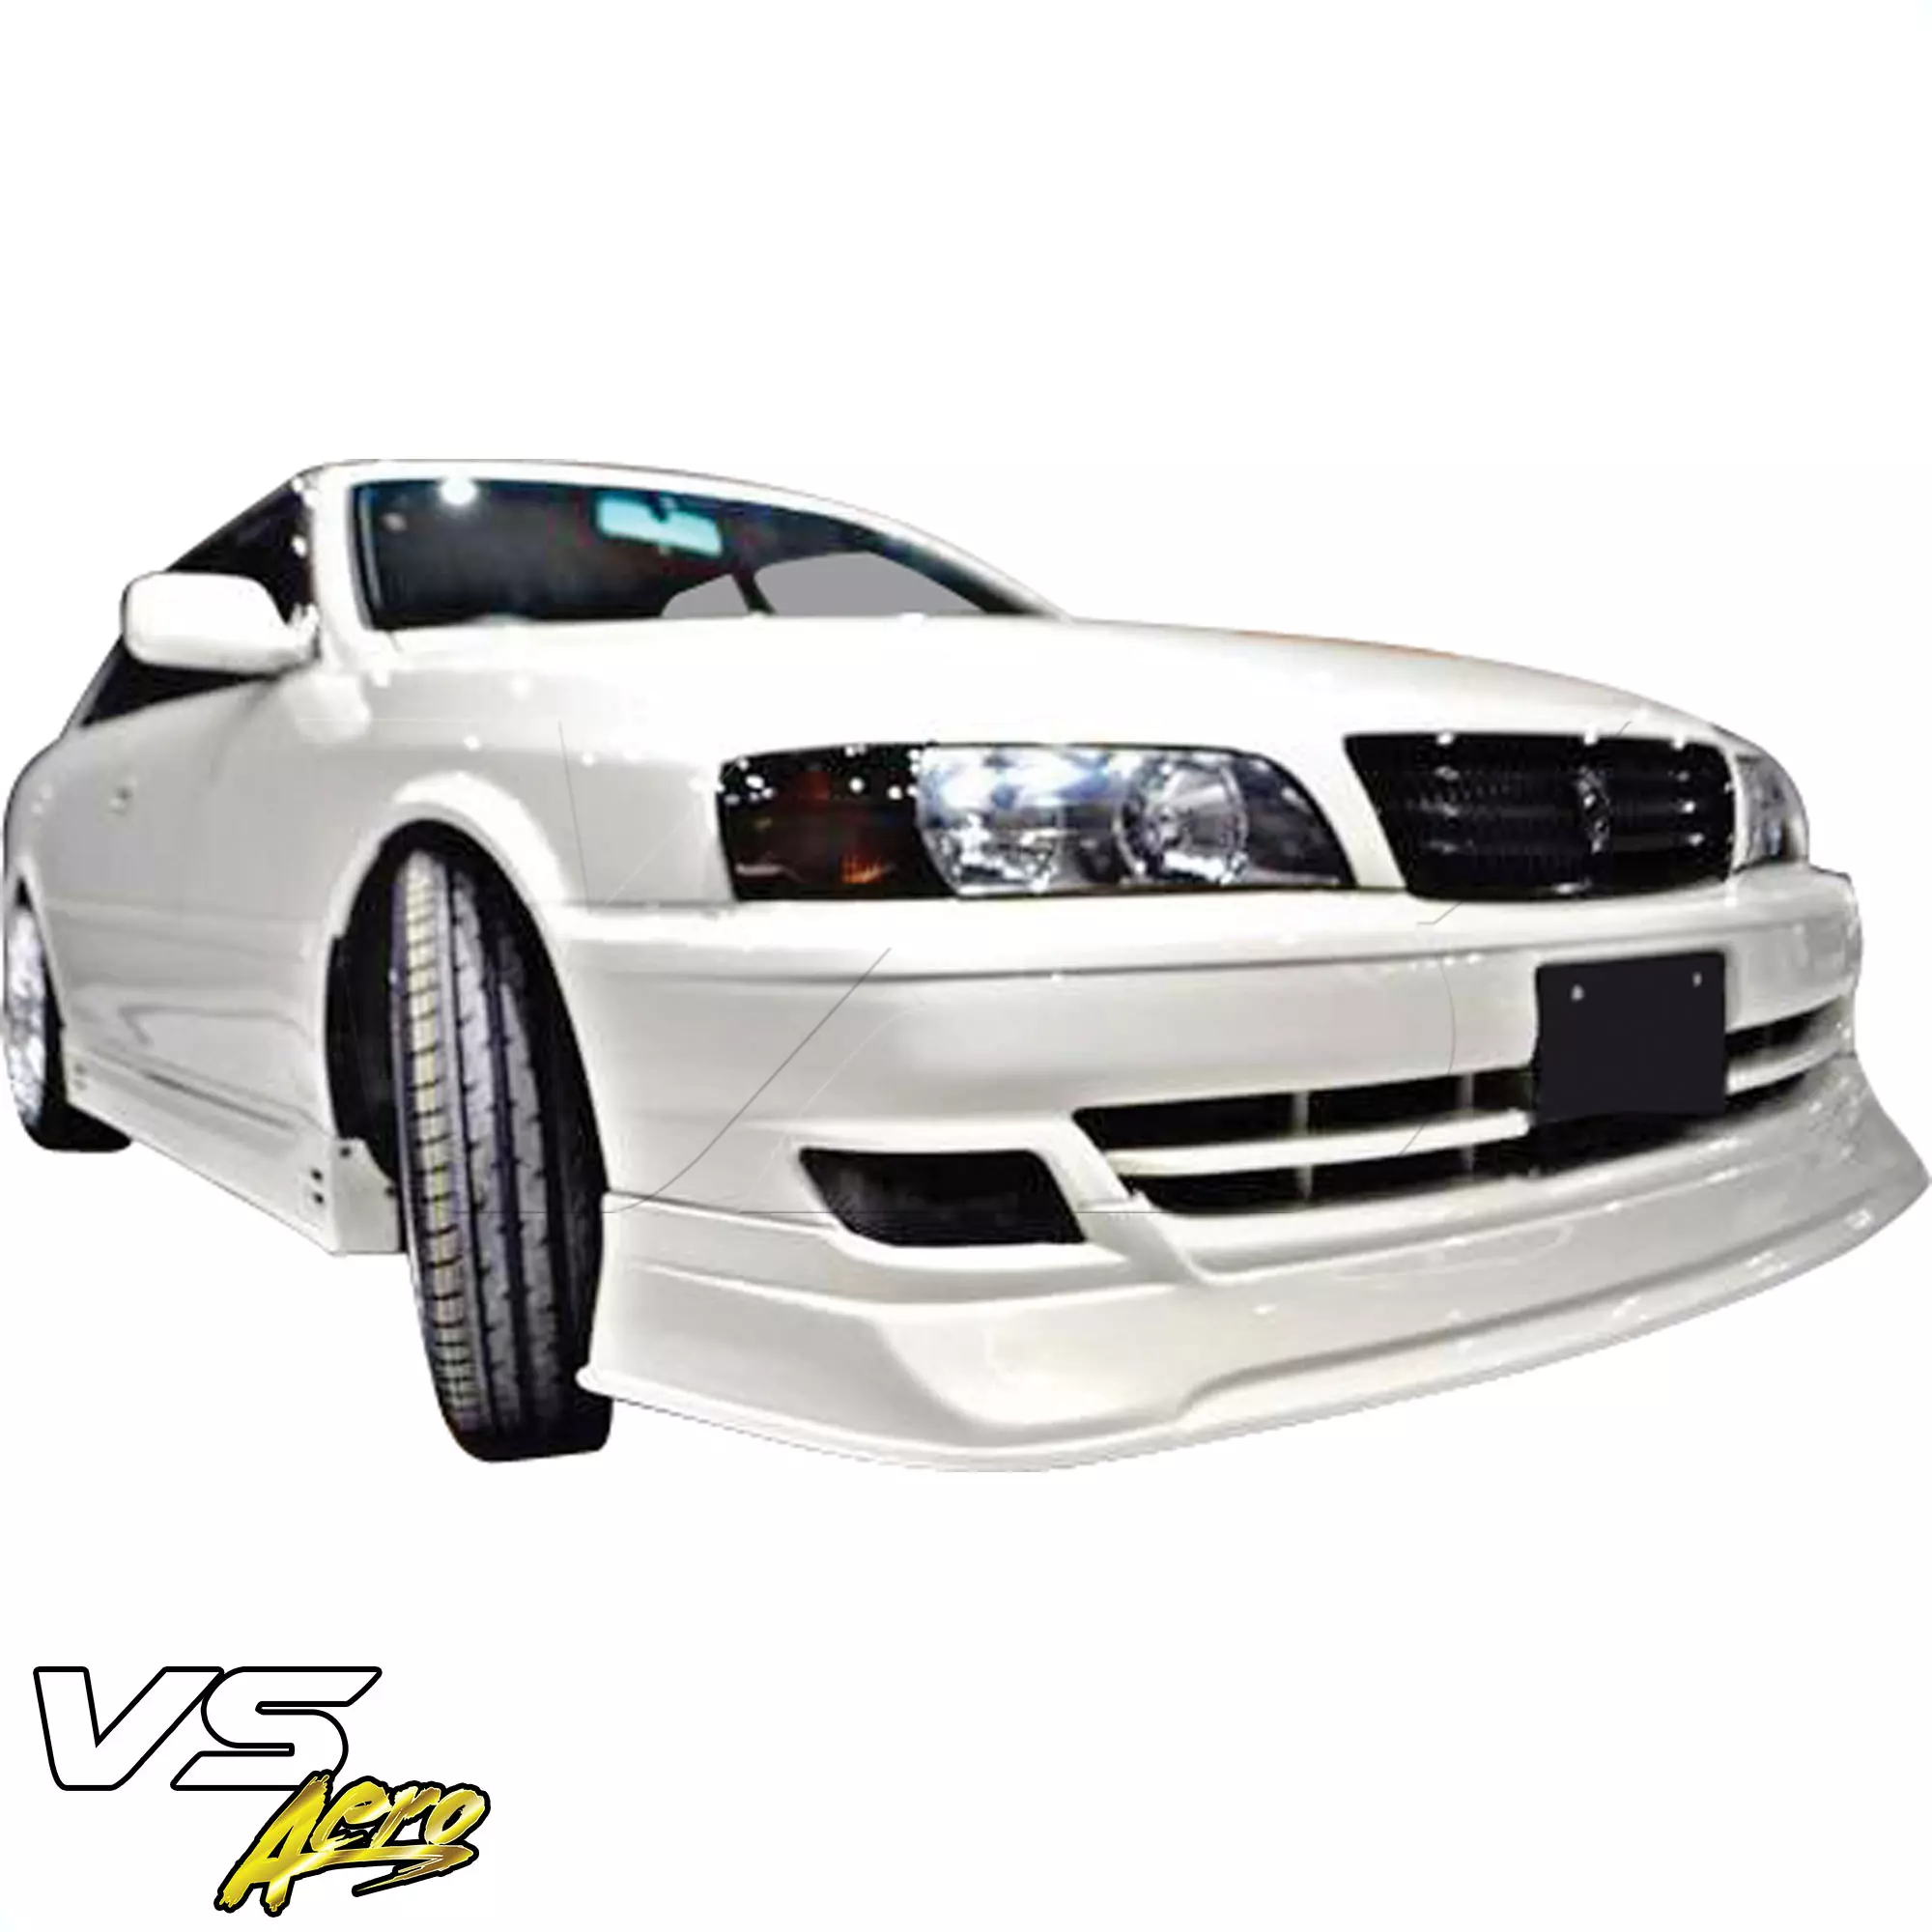 VSaero FRP TRAU Late Front Lip Valance > Toyota Chaser JZX100 1999-2000 - Image 12